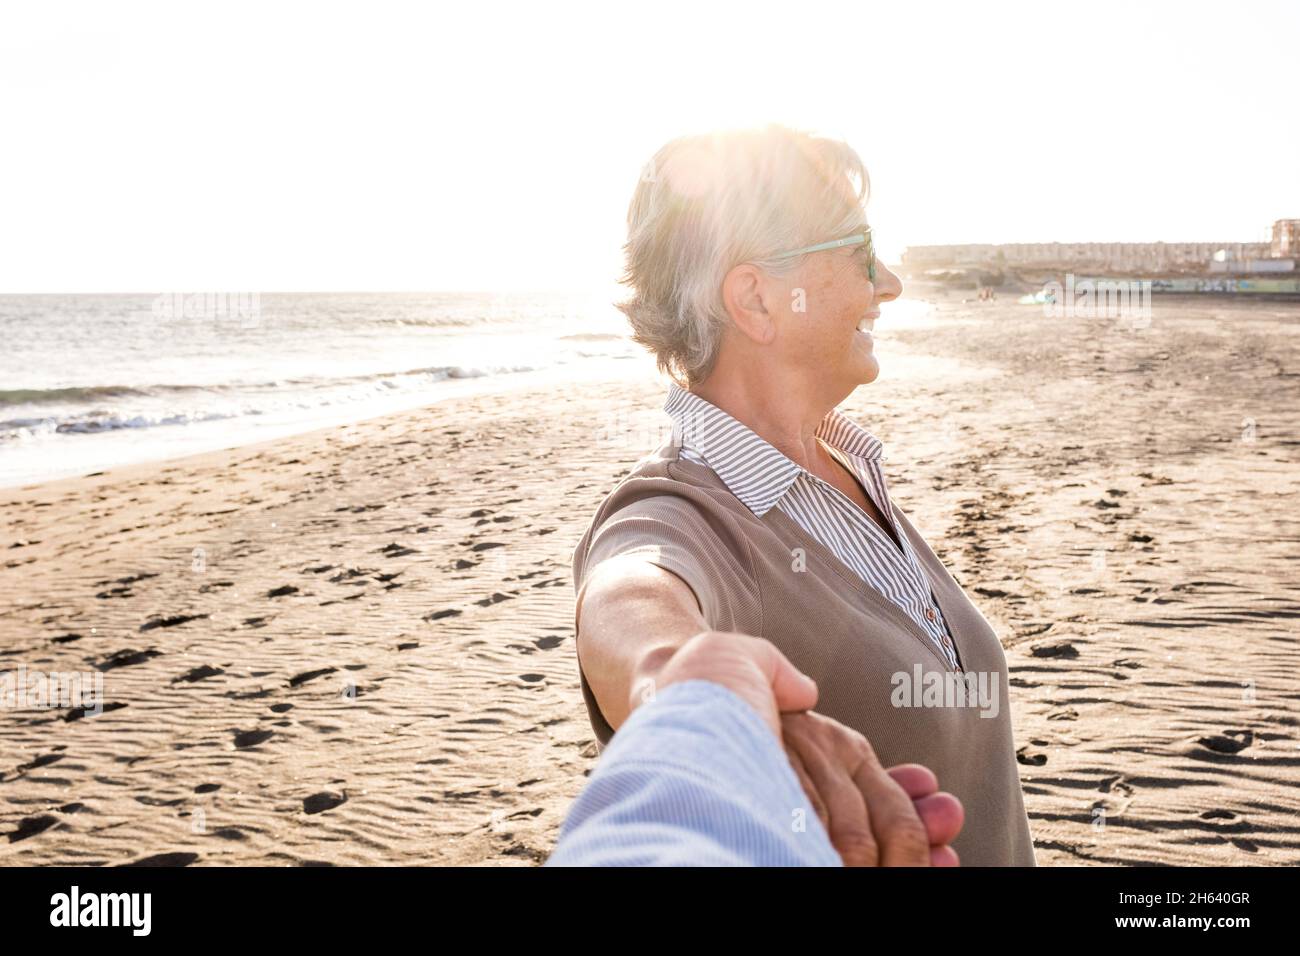 first view and pov of mature and old man holding his wife's hand at the beach having fun and enjoying together summer. two happy seniors outdoors with the sunset at the background. Stock Photo